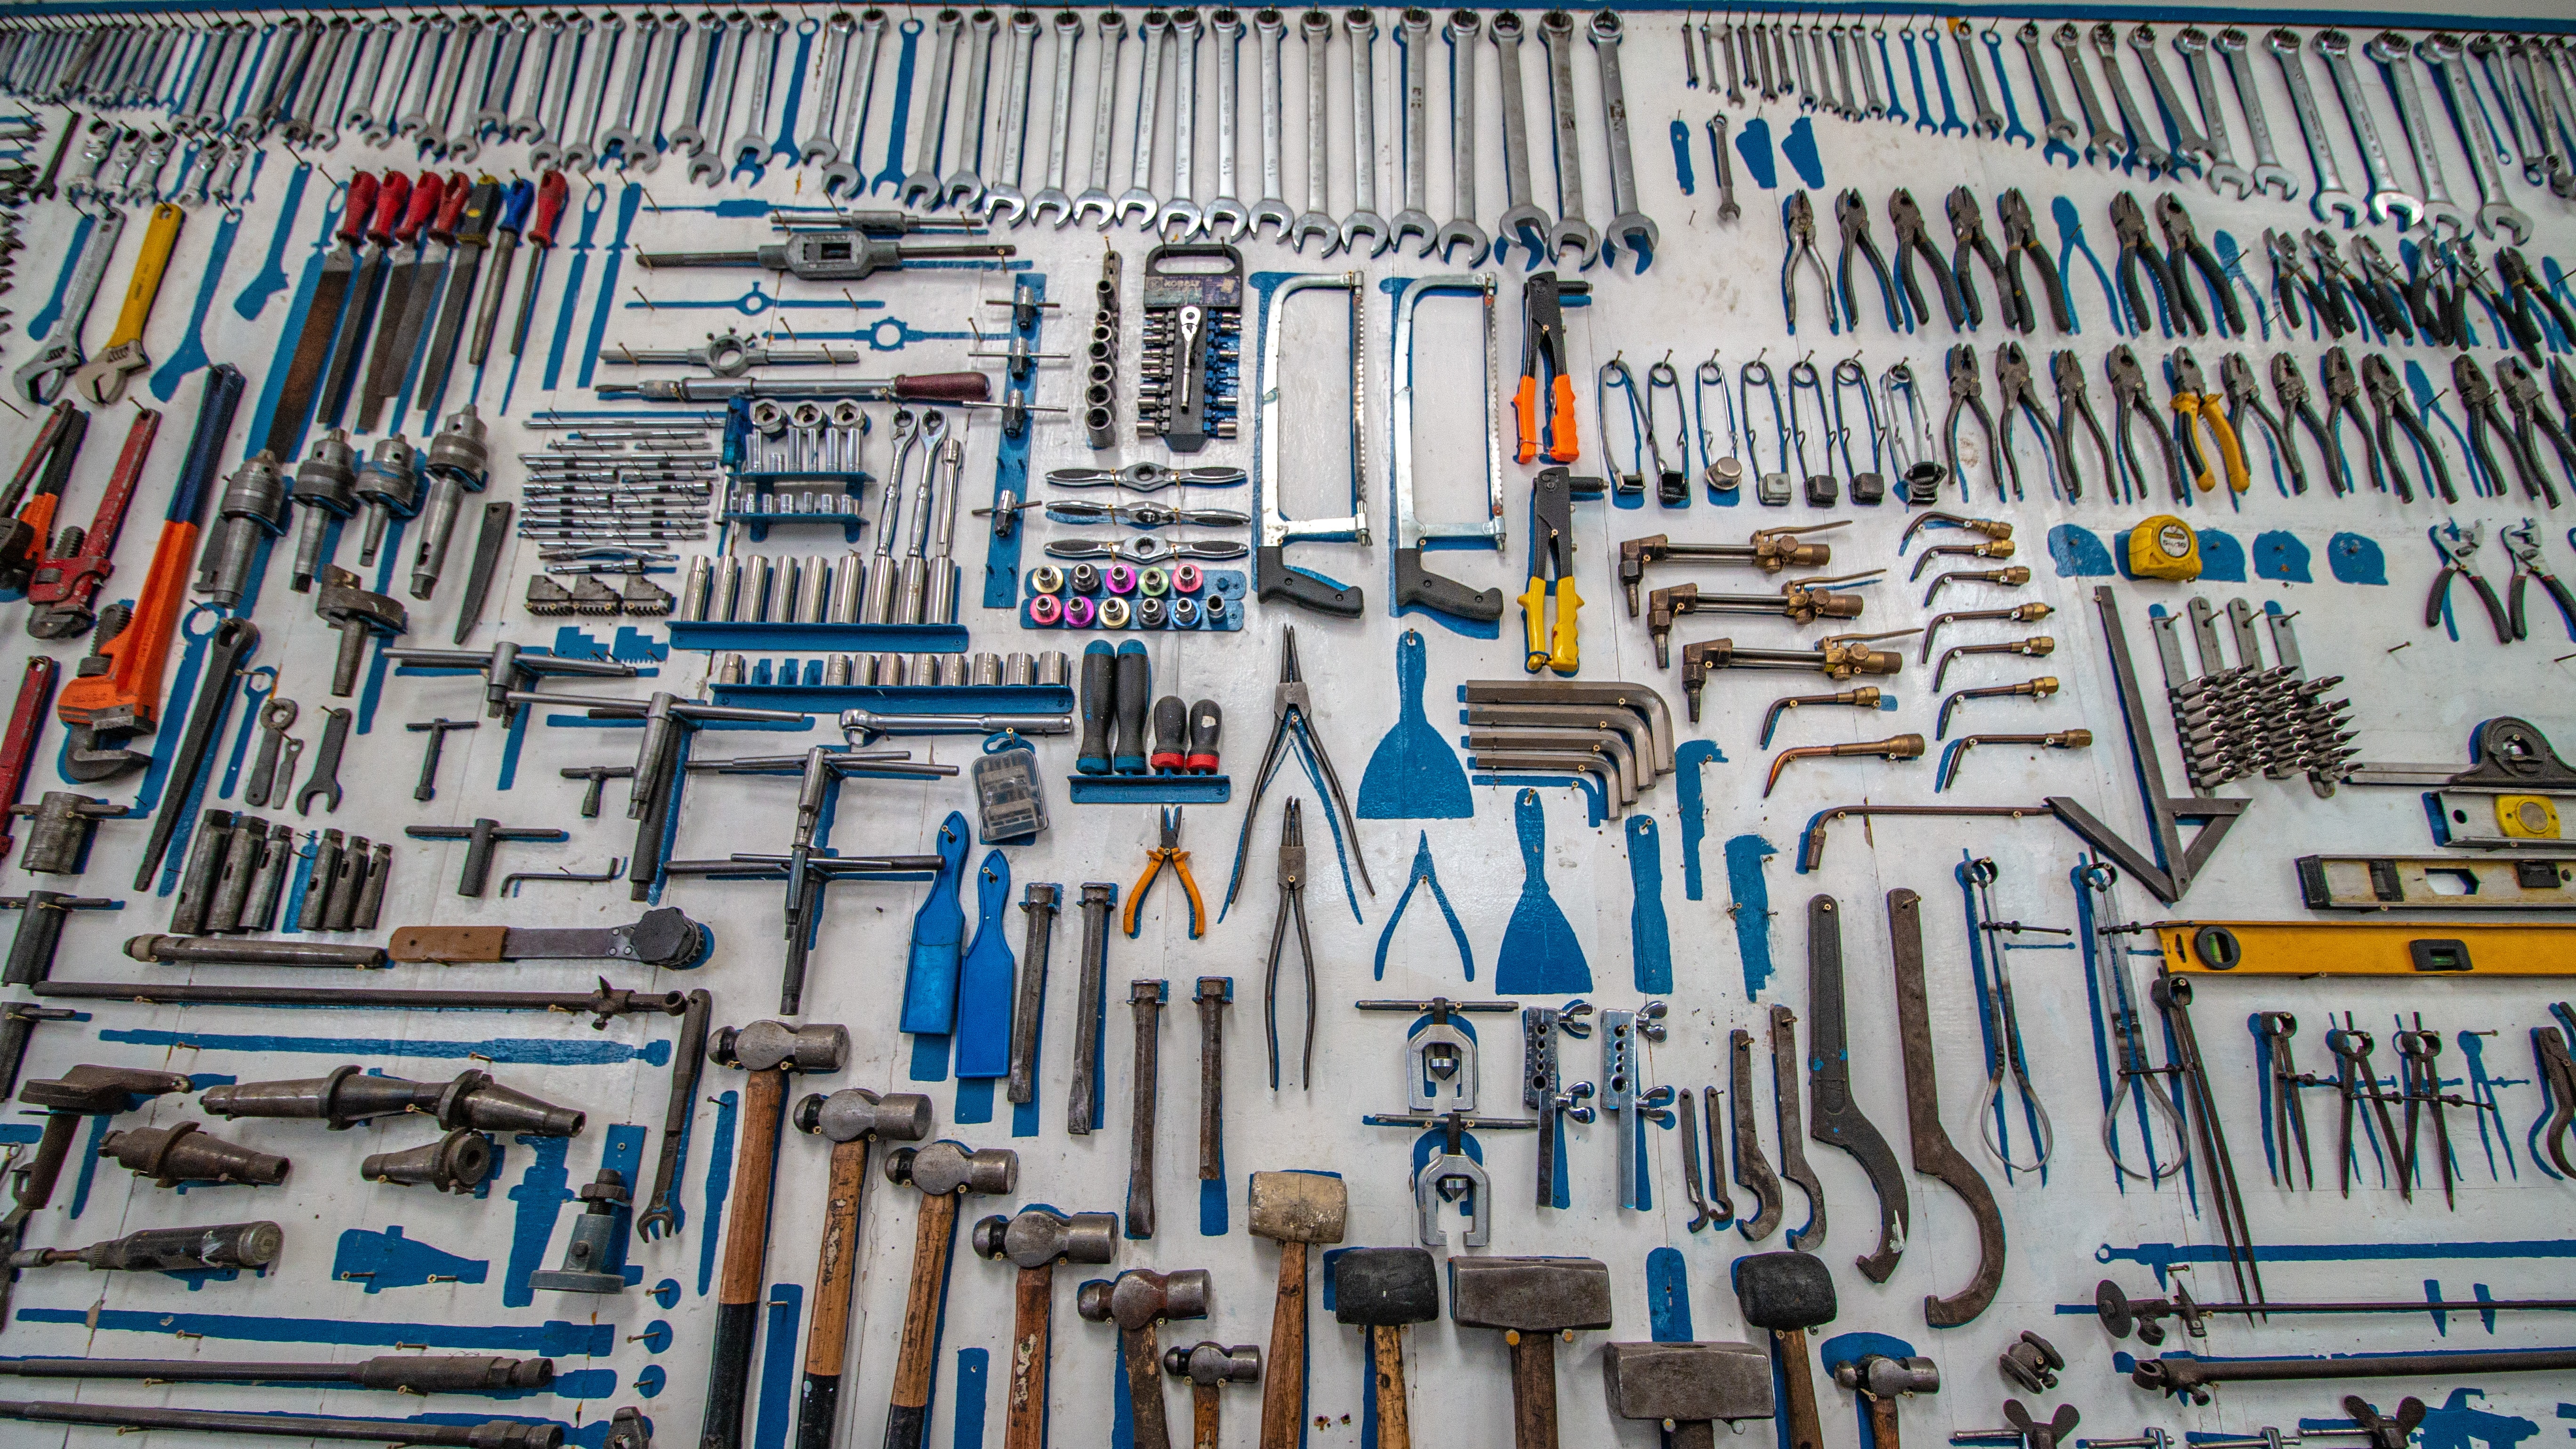 a wall full of carefully organized tools including wrenches, hammers, saws